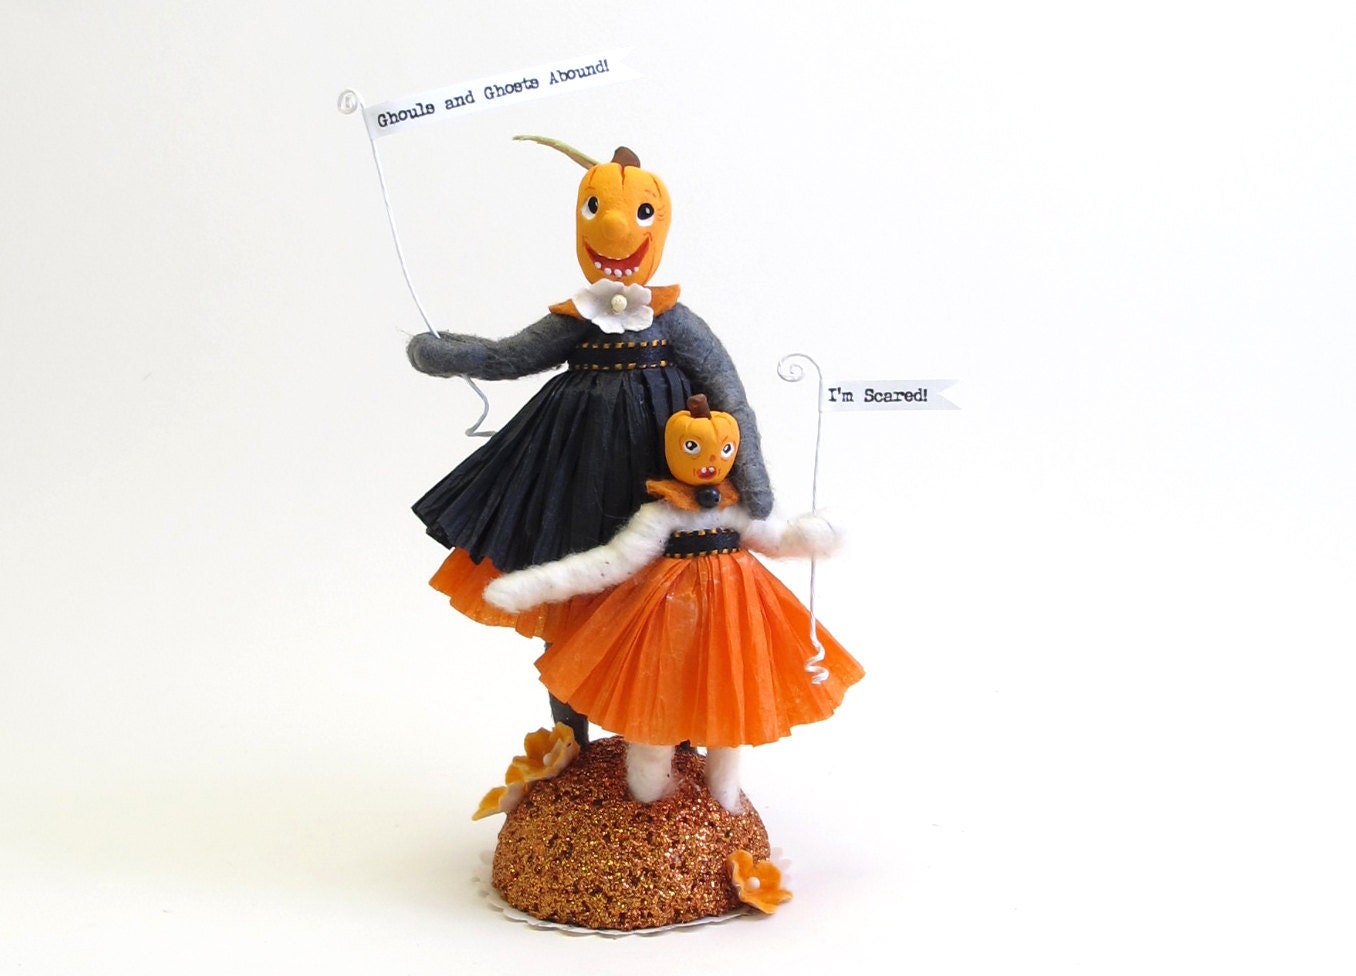 Spun Cotton Vintage Inspired "The Vine Family" Halloween Pumpkin Girl and Mom Figures with Paper Mache Heads OOAK